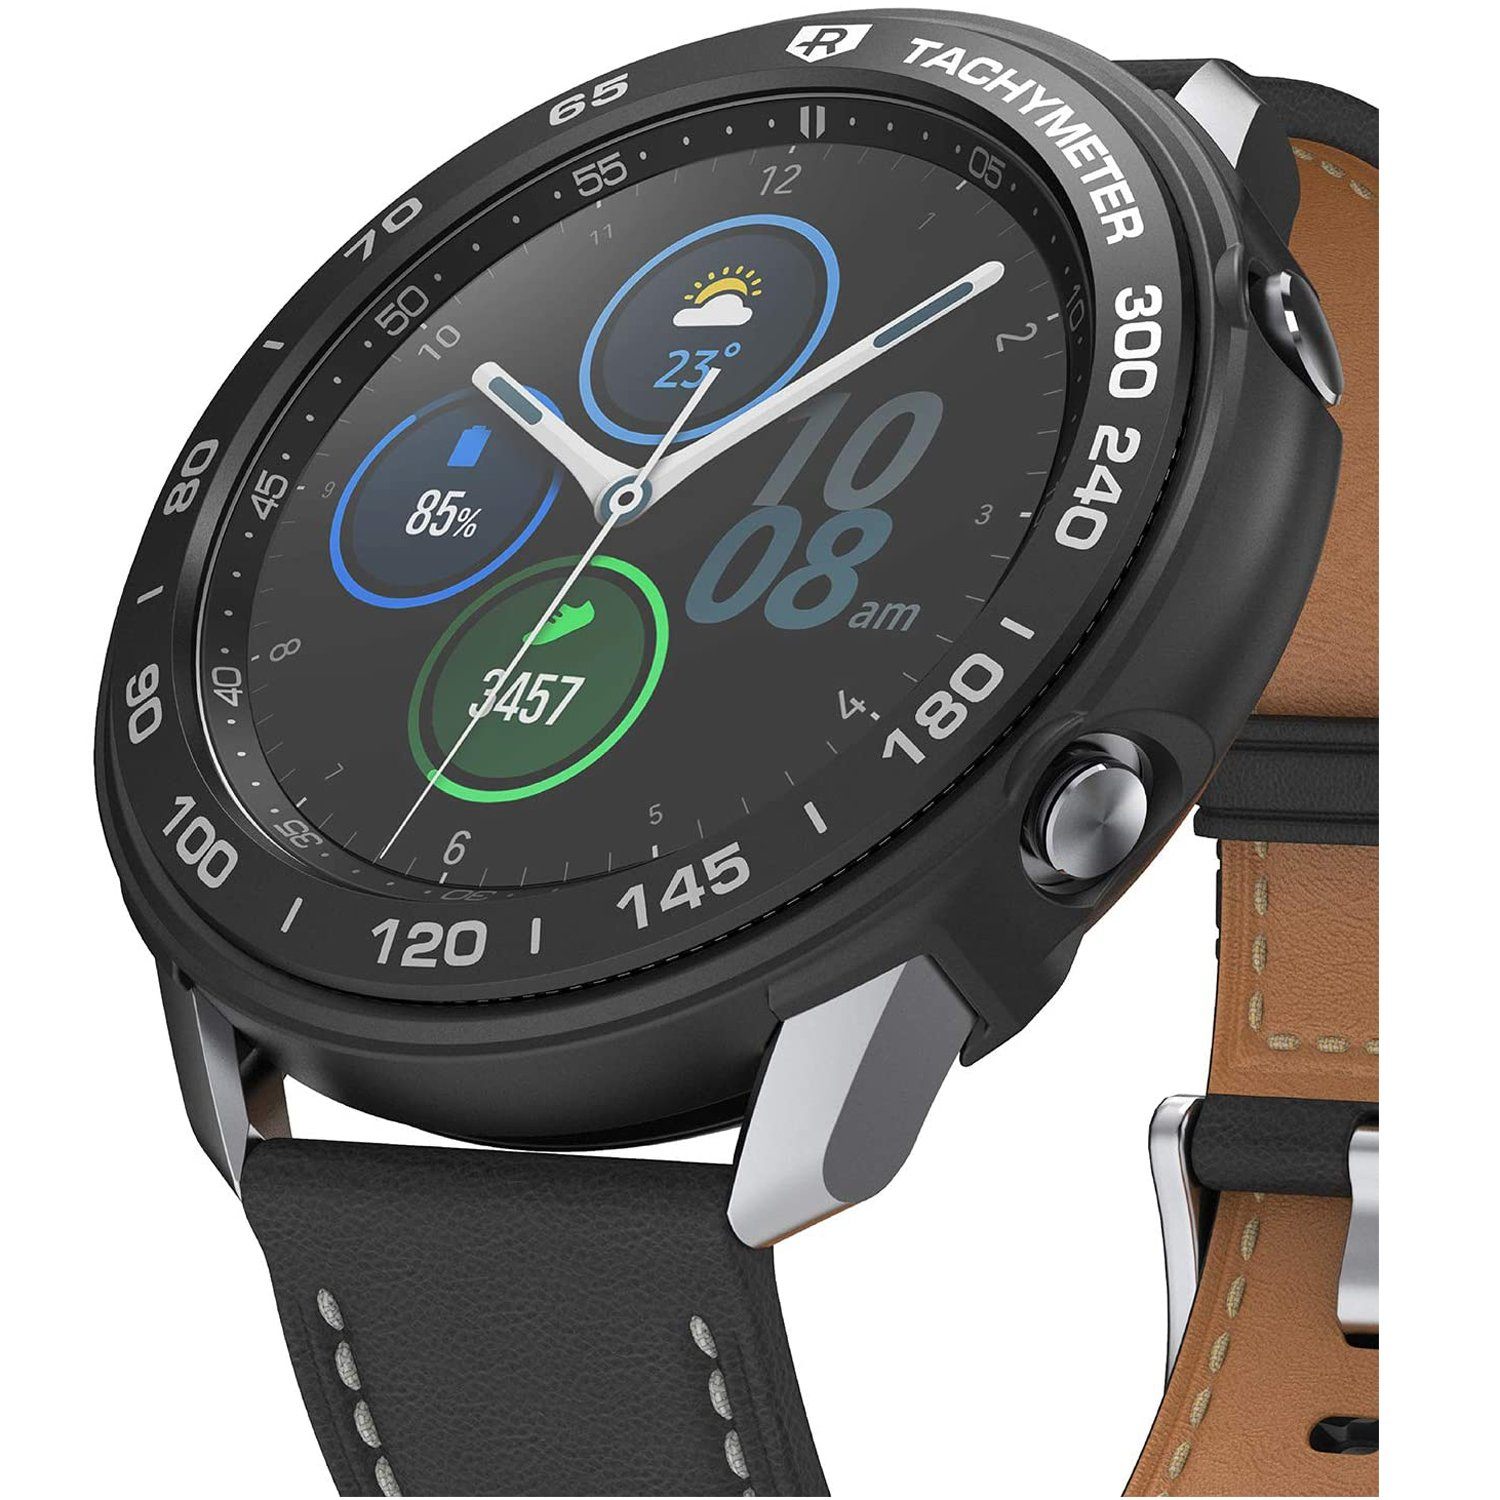 Ringke Air Sports + Bezel Styling Combo Pack for Samsung Galaxy Watch 3